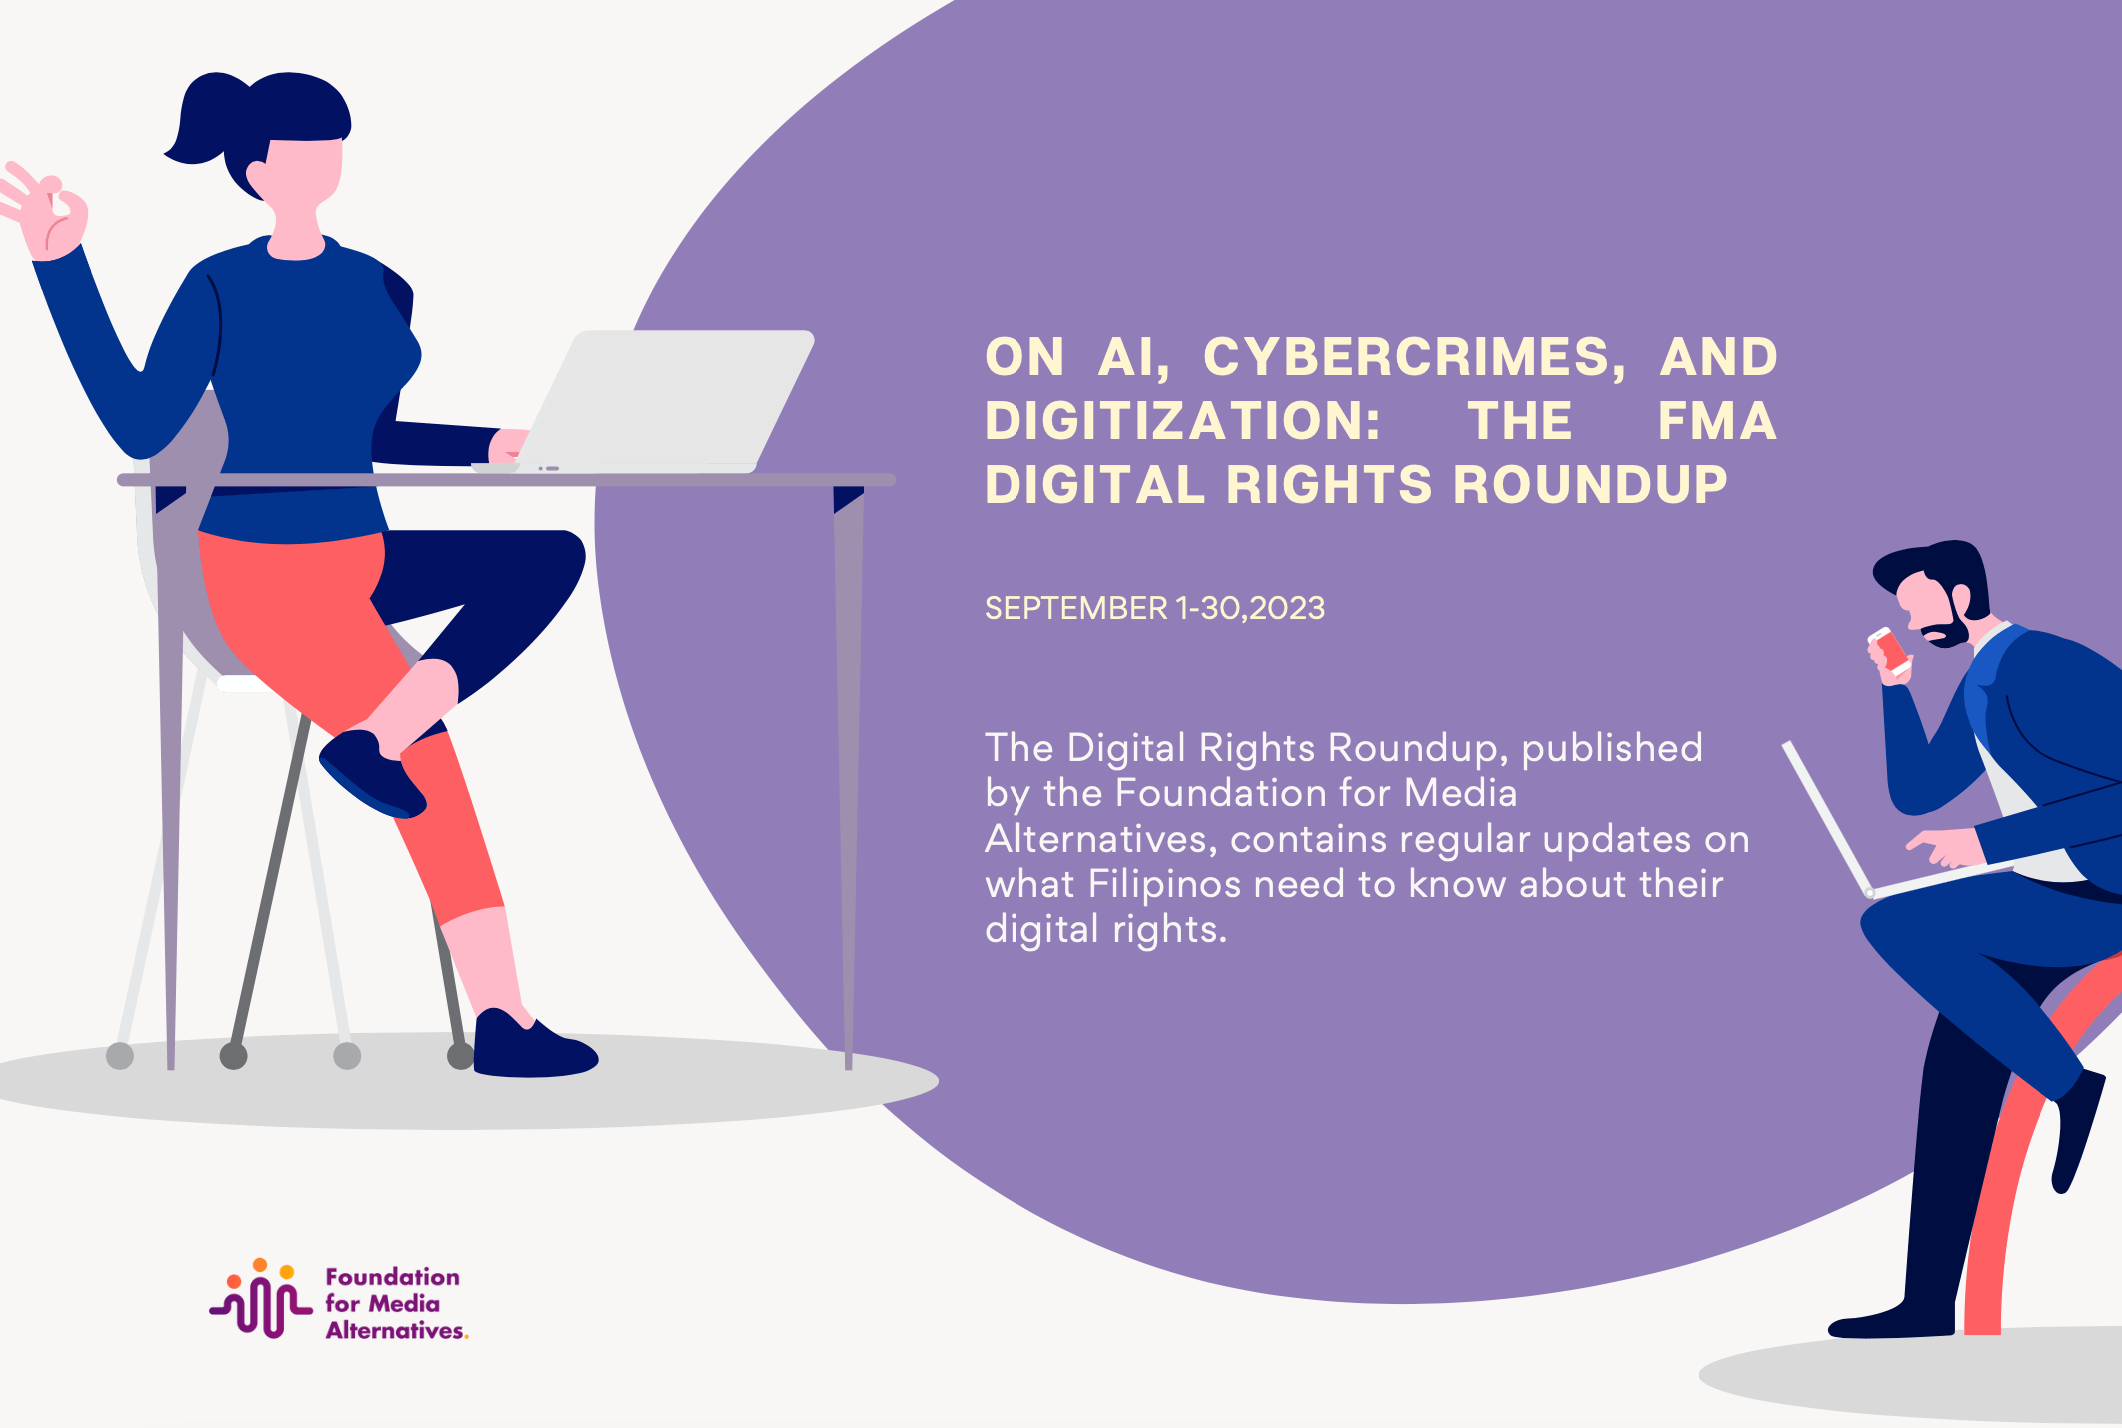 On AI, cybercrimes, and digitization: The FMA Digital Rights Roundup (September 1- 30, 2023)